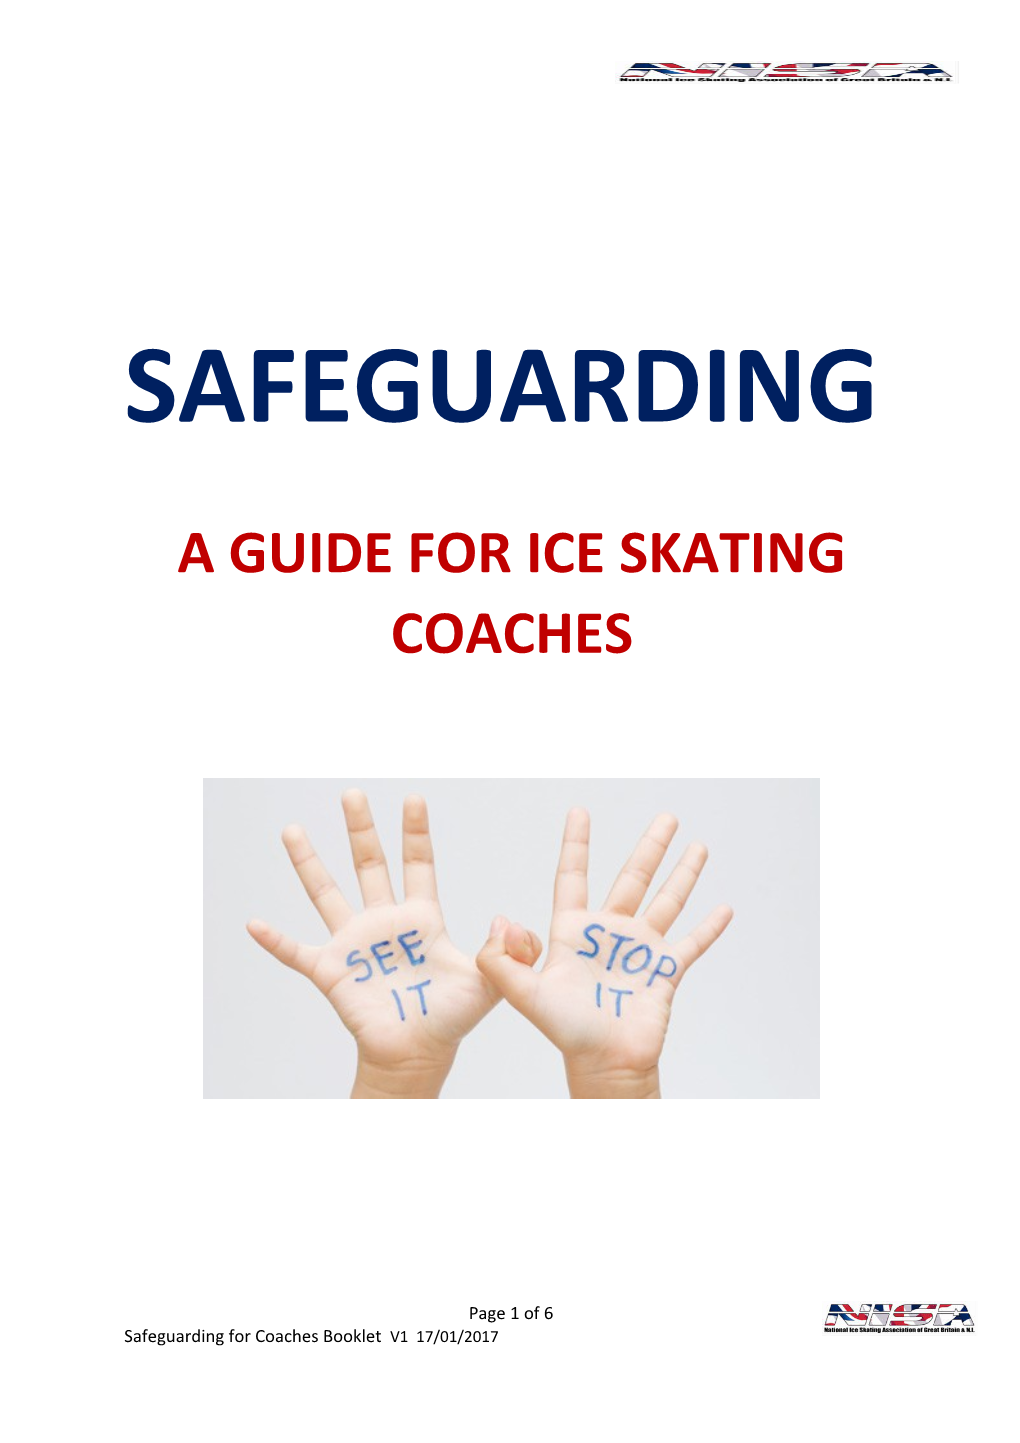 A Guide for Ice Skating Coaches